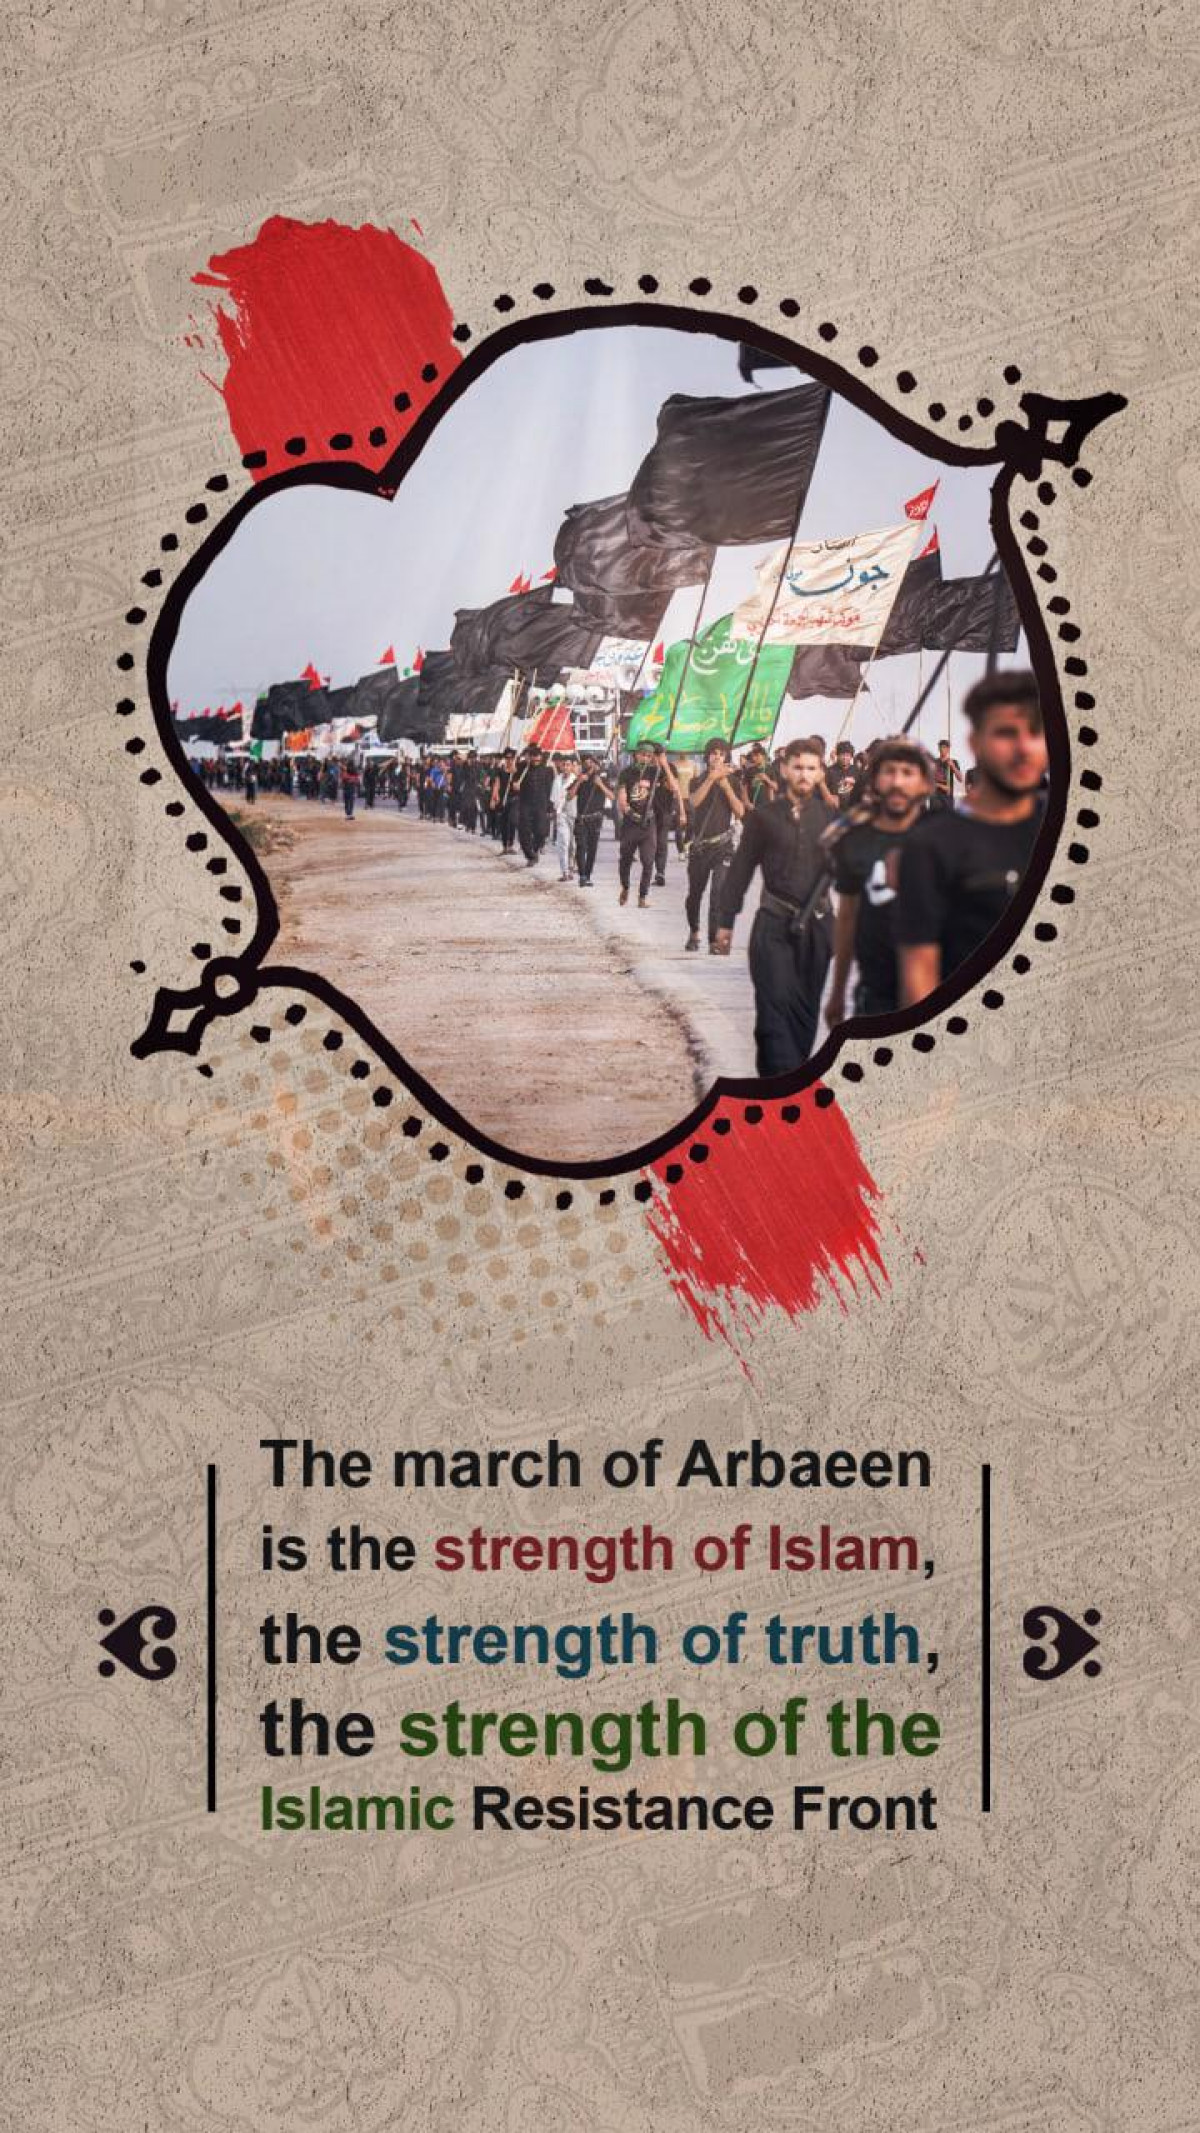 The march of Arbaeen is the strength of Islam, the strength of truth, the strength of the Islamic Resistance Front